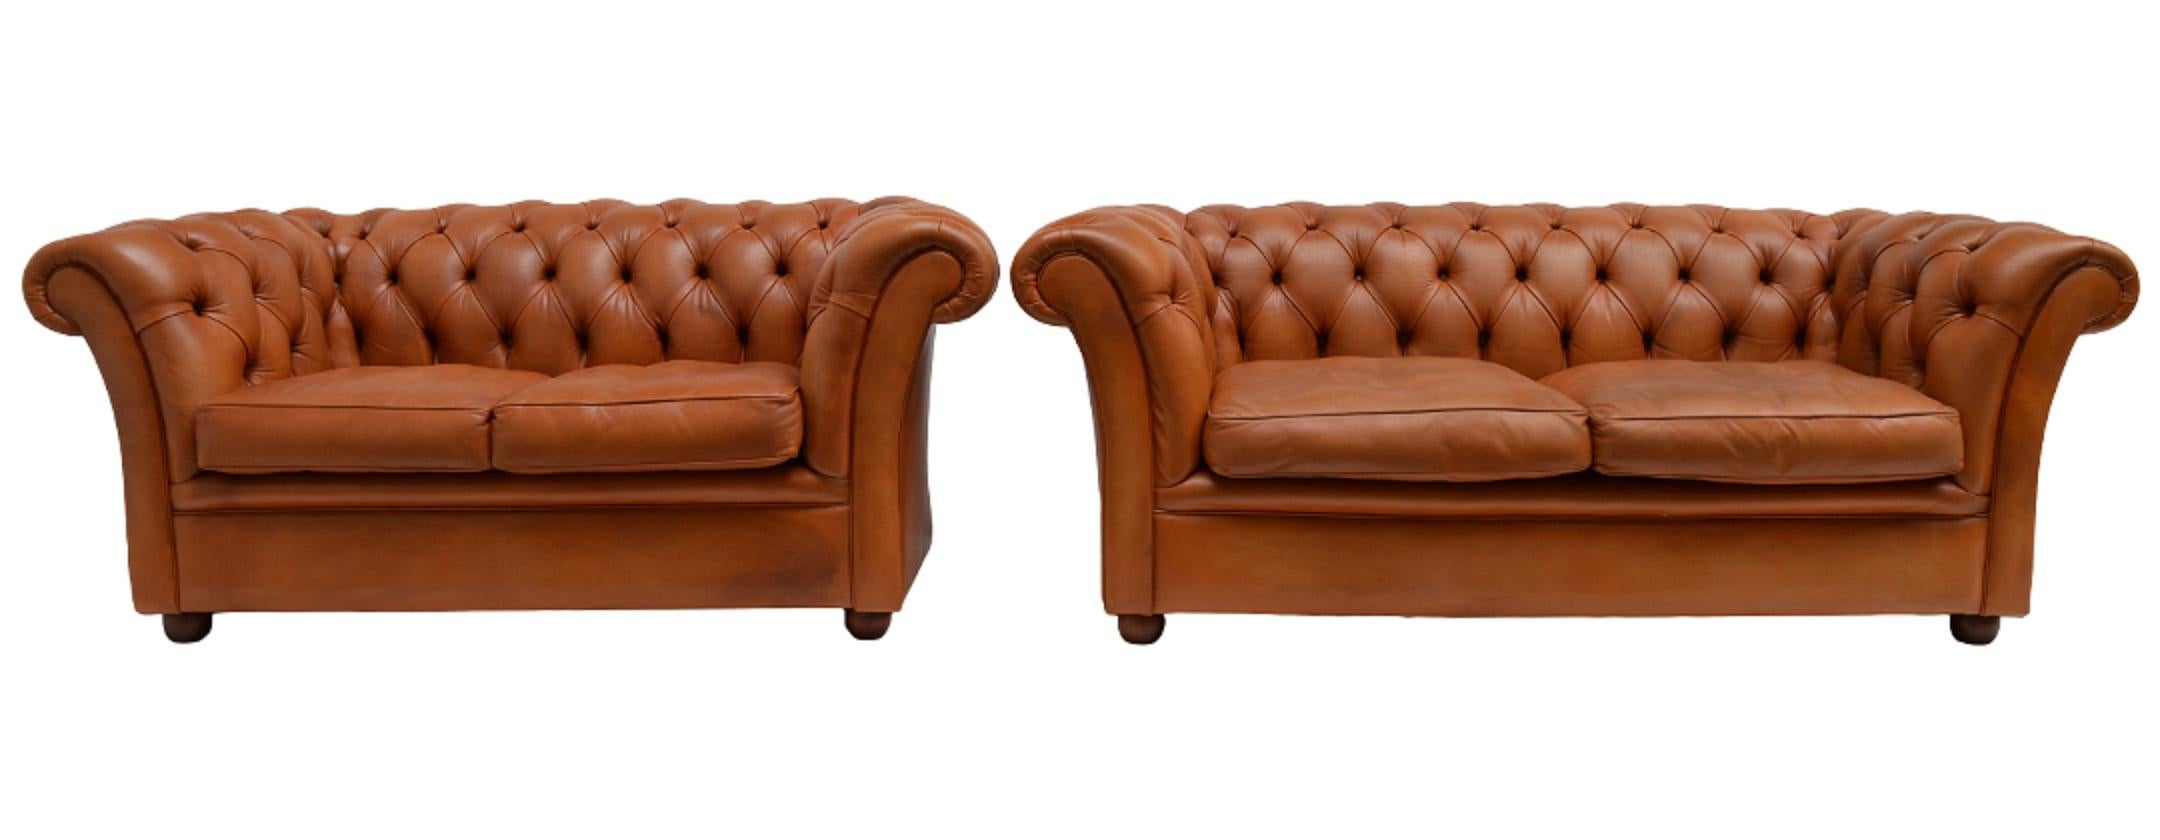 Leather Original Delta Chesterfield 3+2 Settee in Cognac Cowhide For Sale